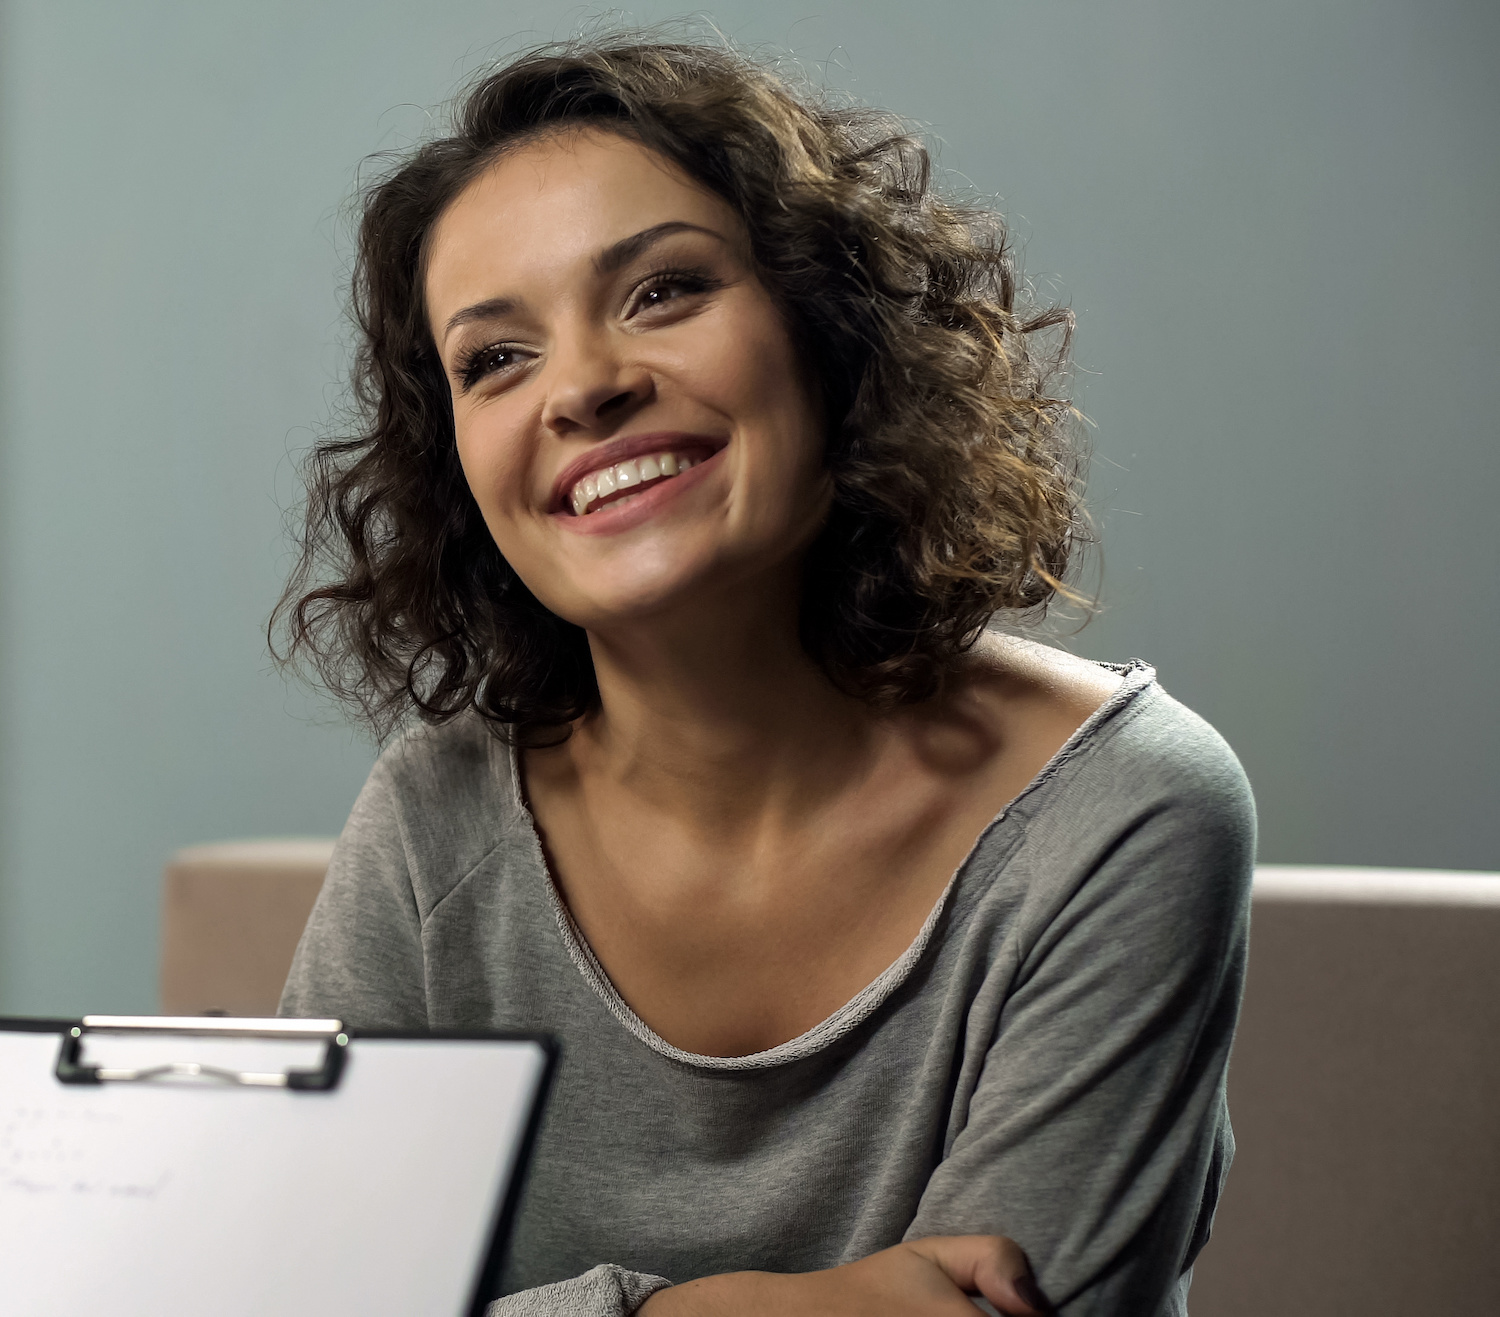 Smiling woman feeling confident during therapy